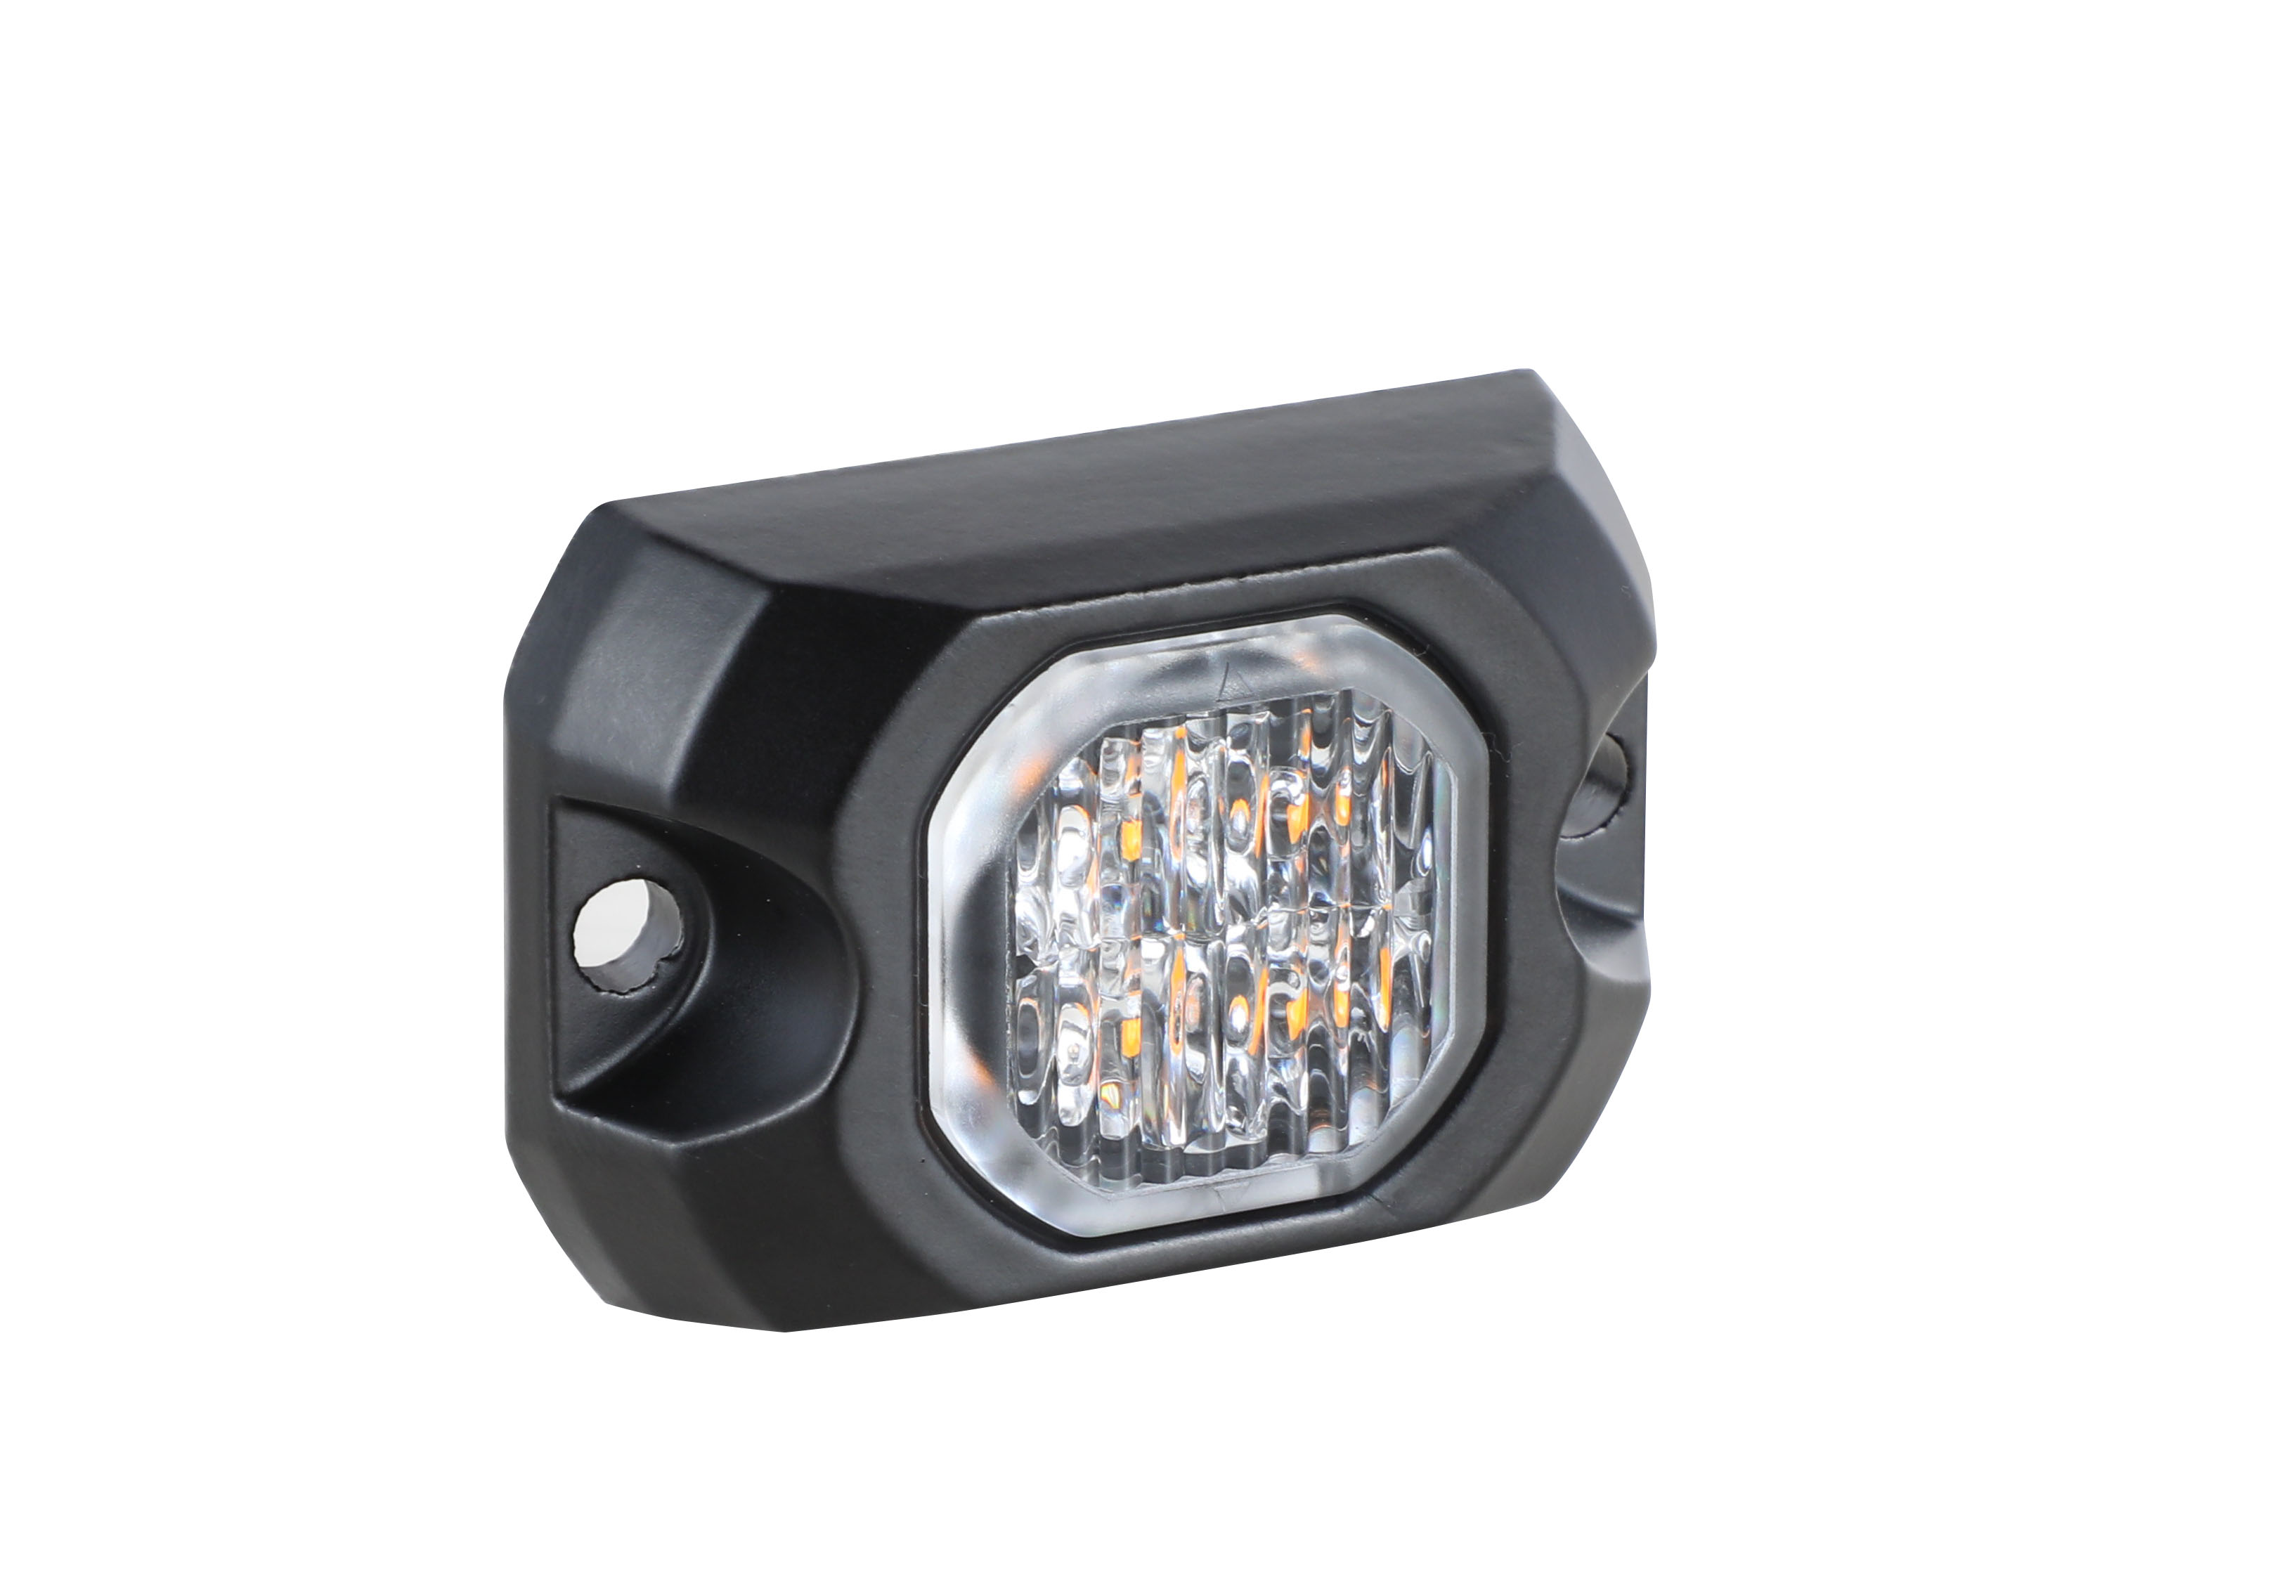 LED Truck Light with a Variety of Shapes - Yeeu Chang Company